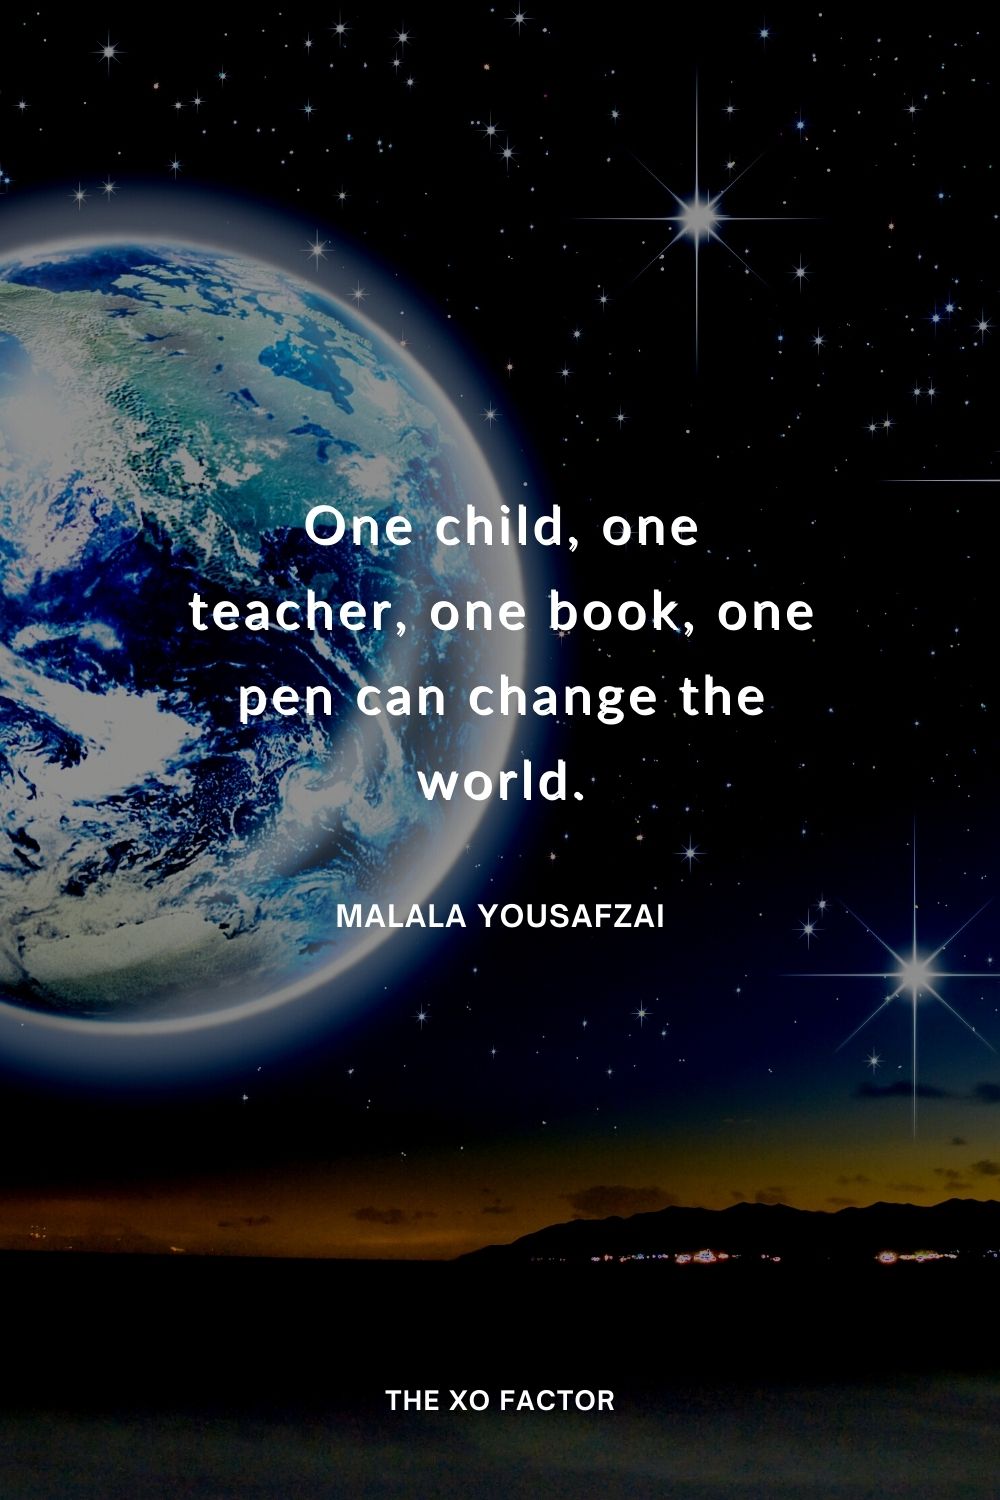 One child, one teacher, one book, one pen can change the world.